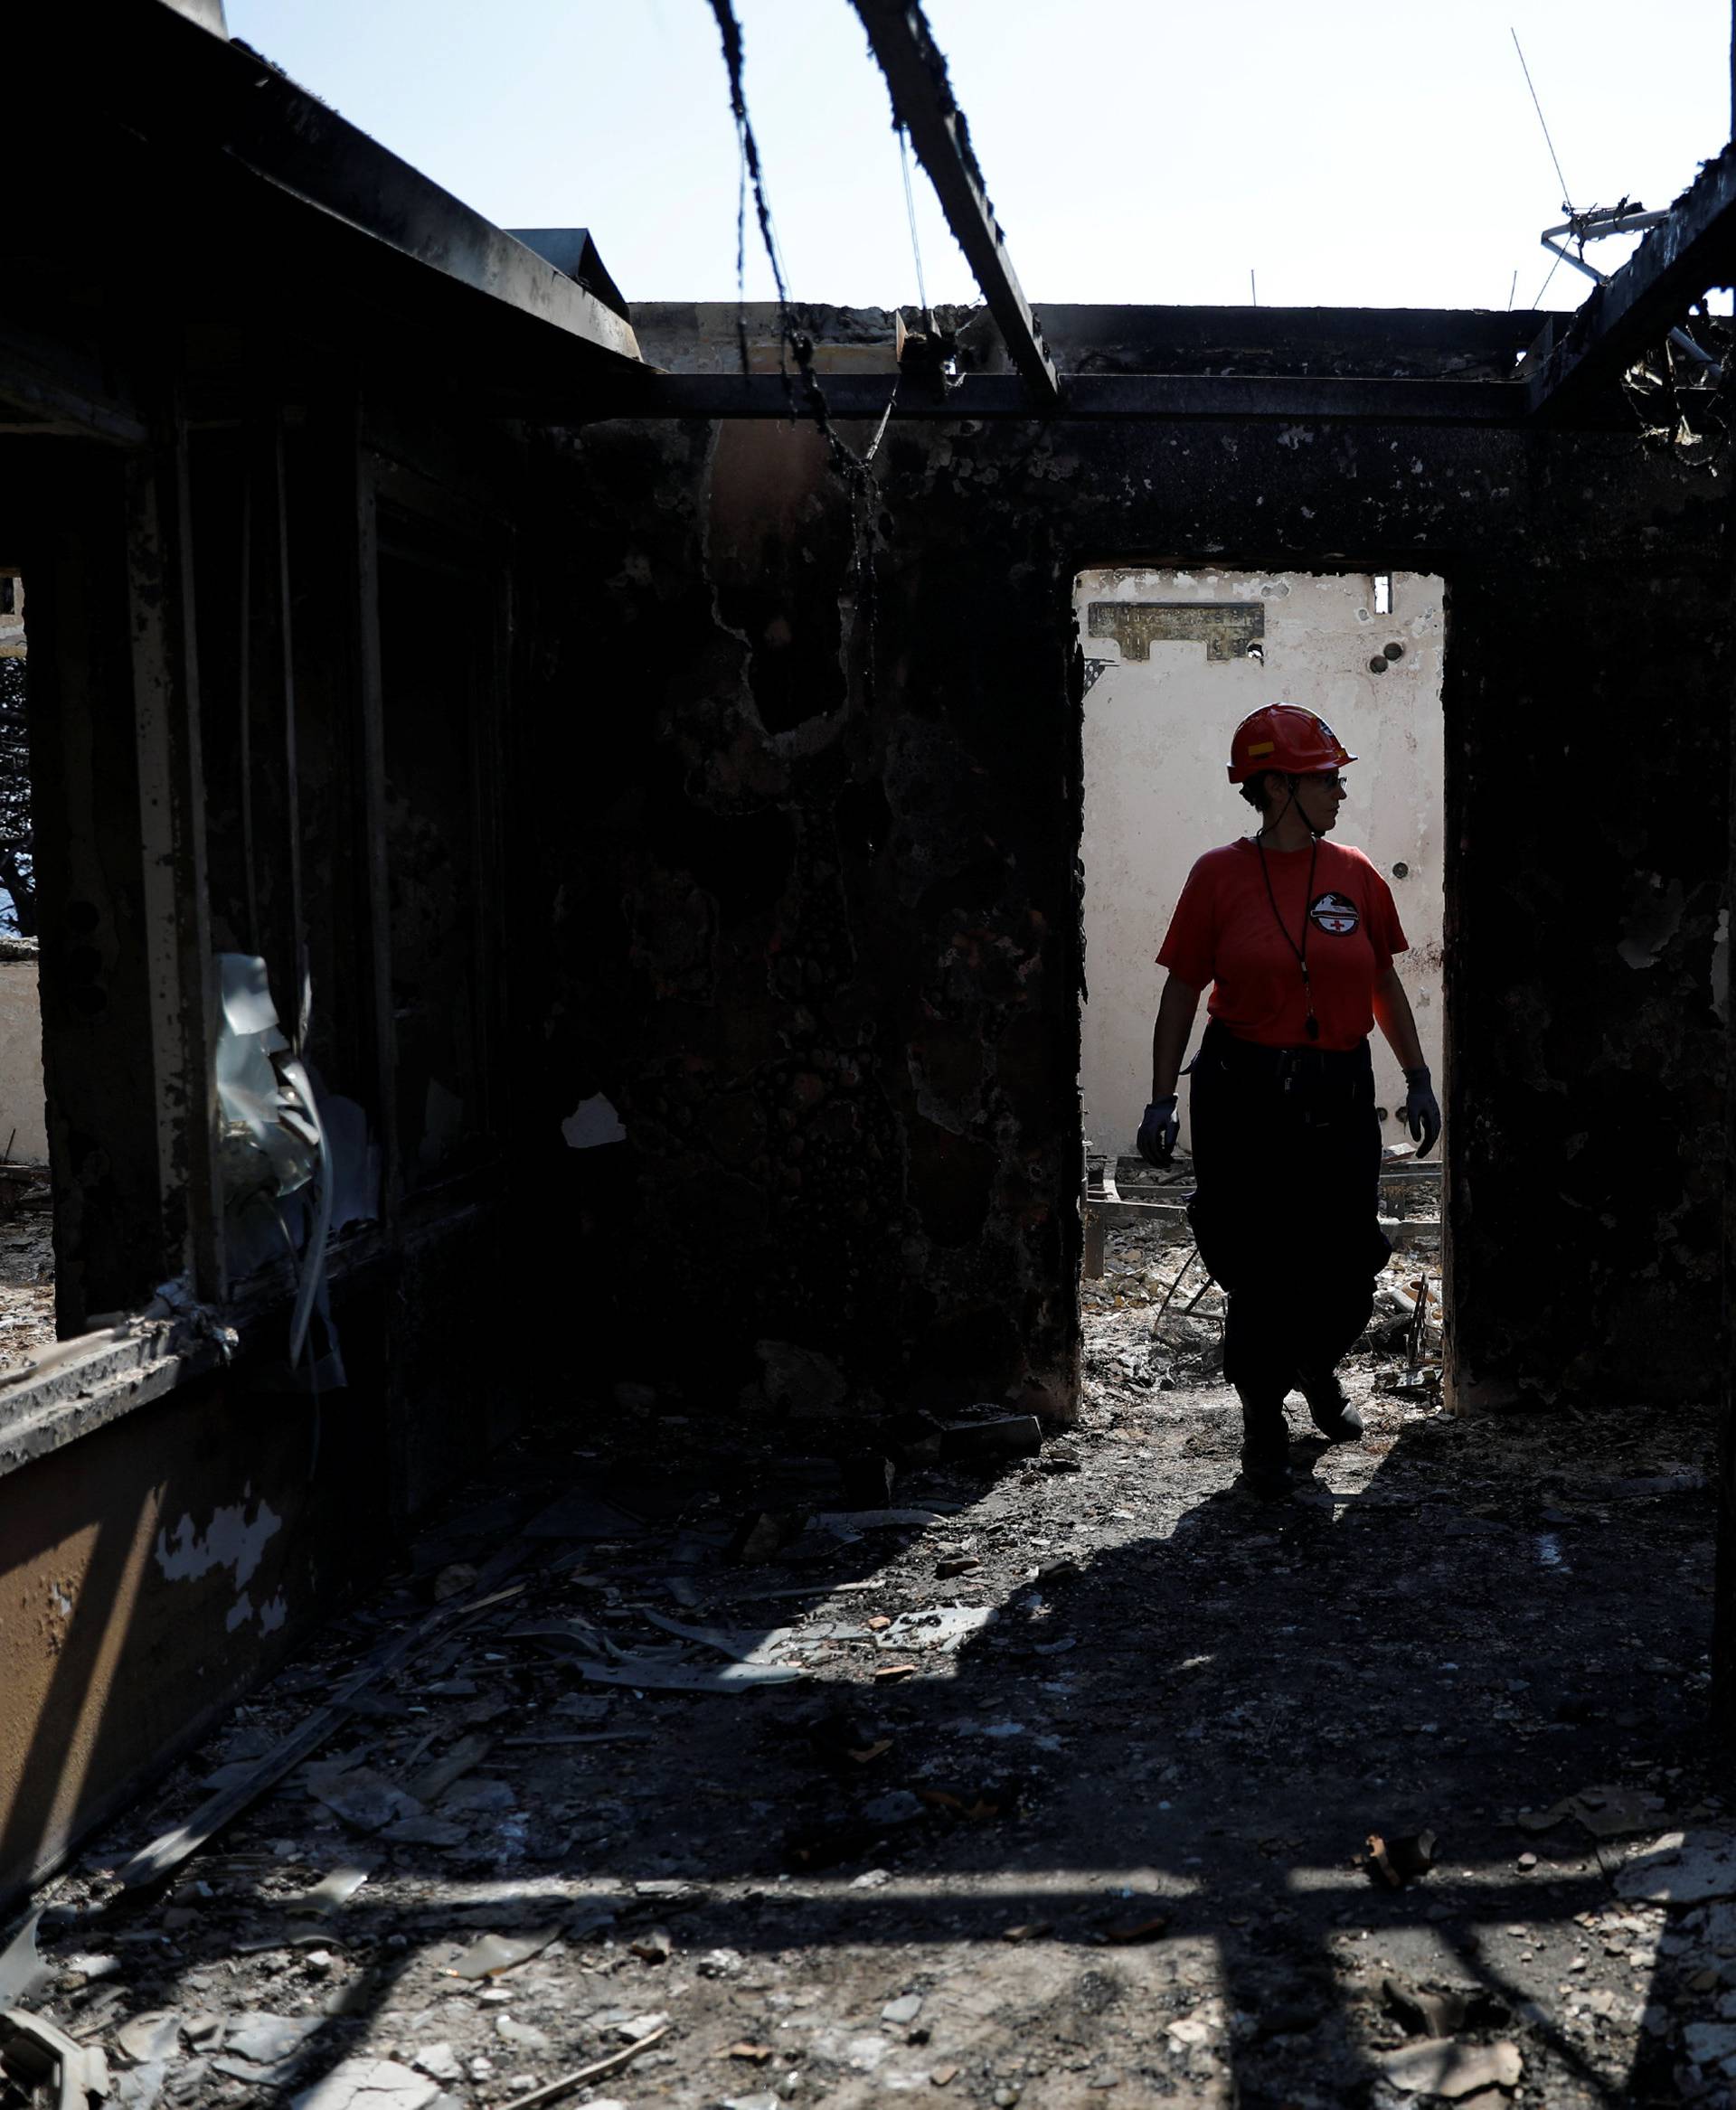 A member of a rescue team searches inside a destroyed building following a wildfire at the village of Mati